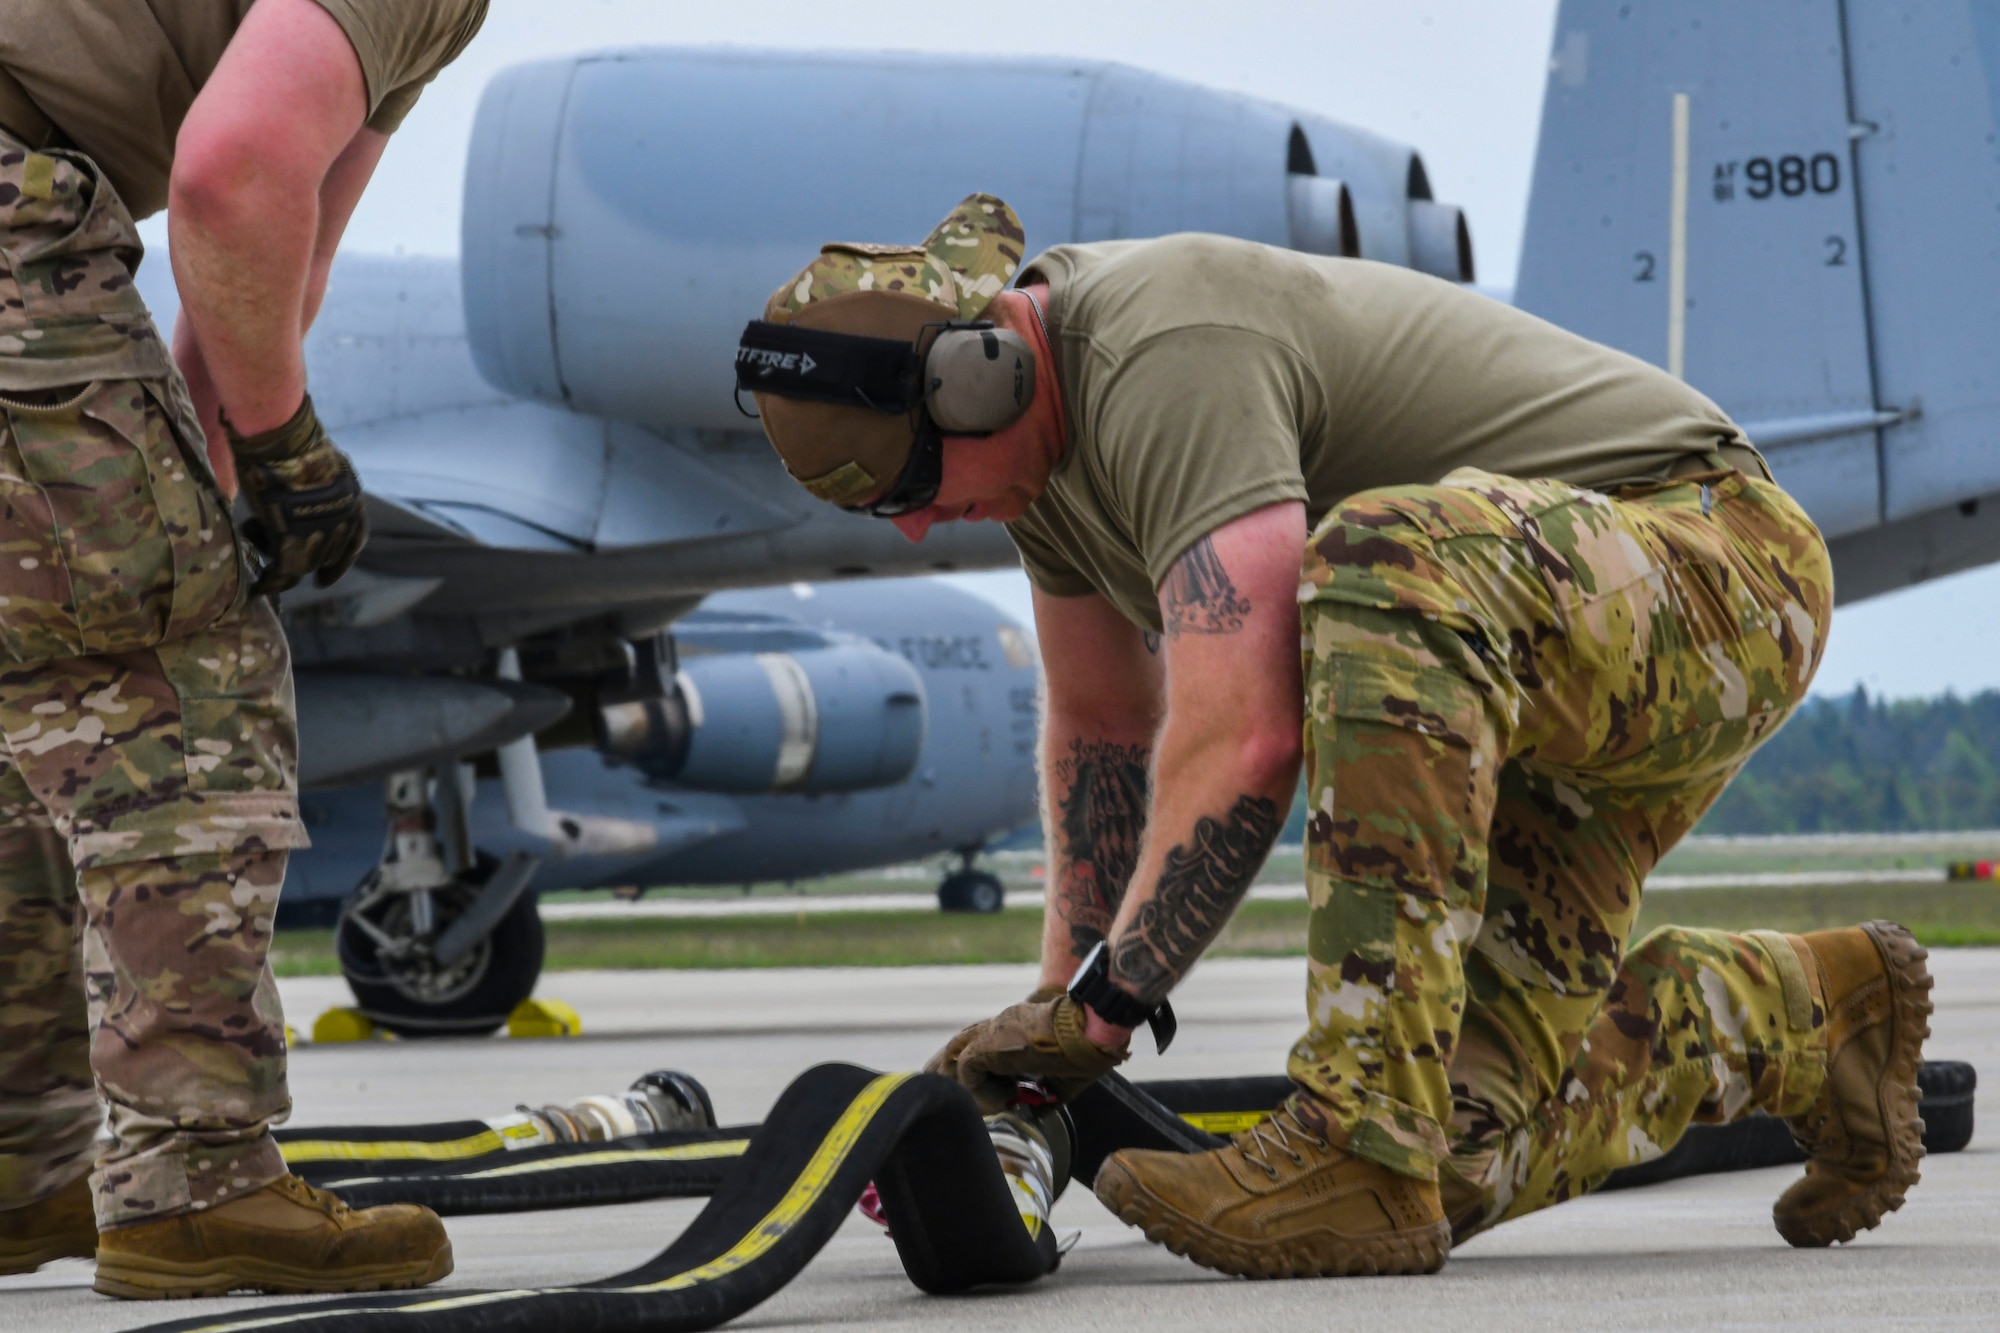 An Airmen from the 19th Airlift Wing prepares a hose for refueling